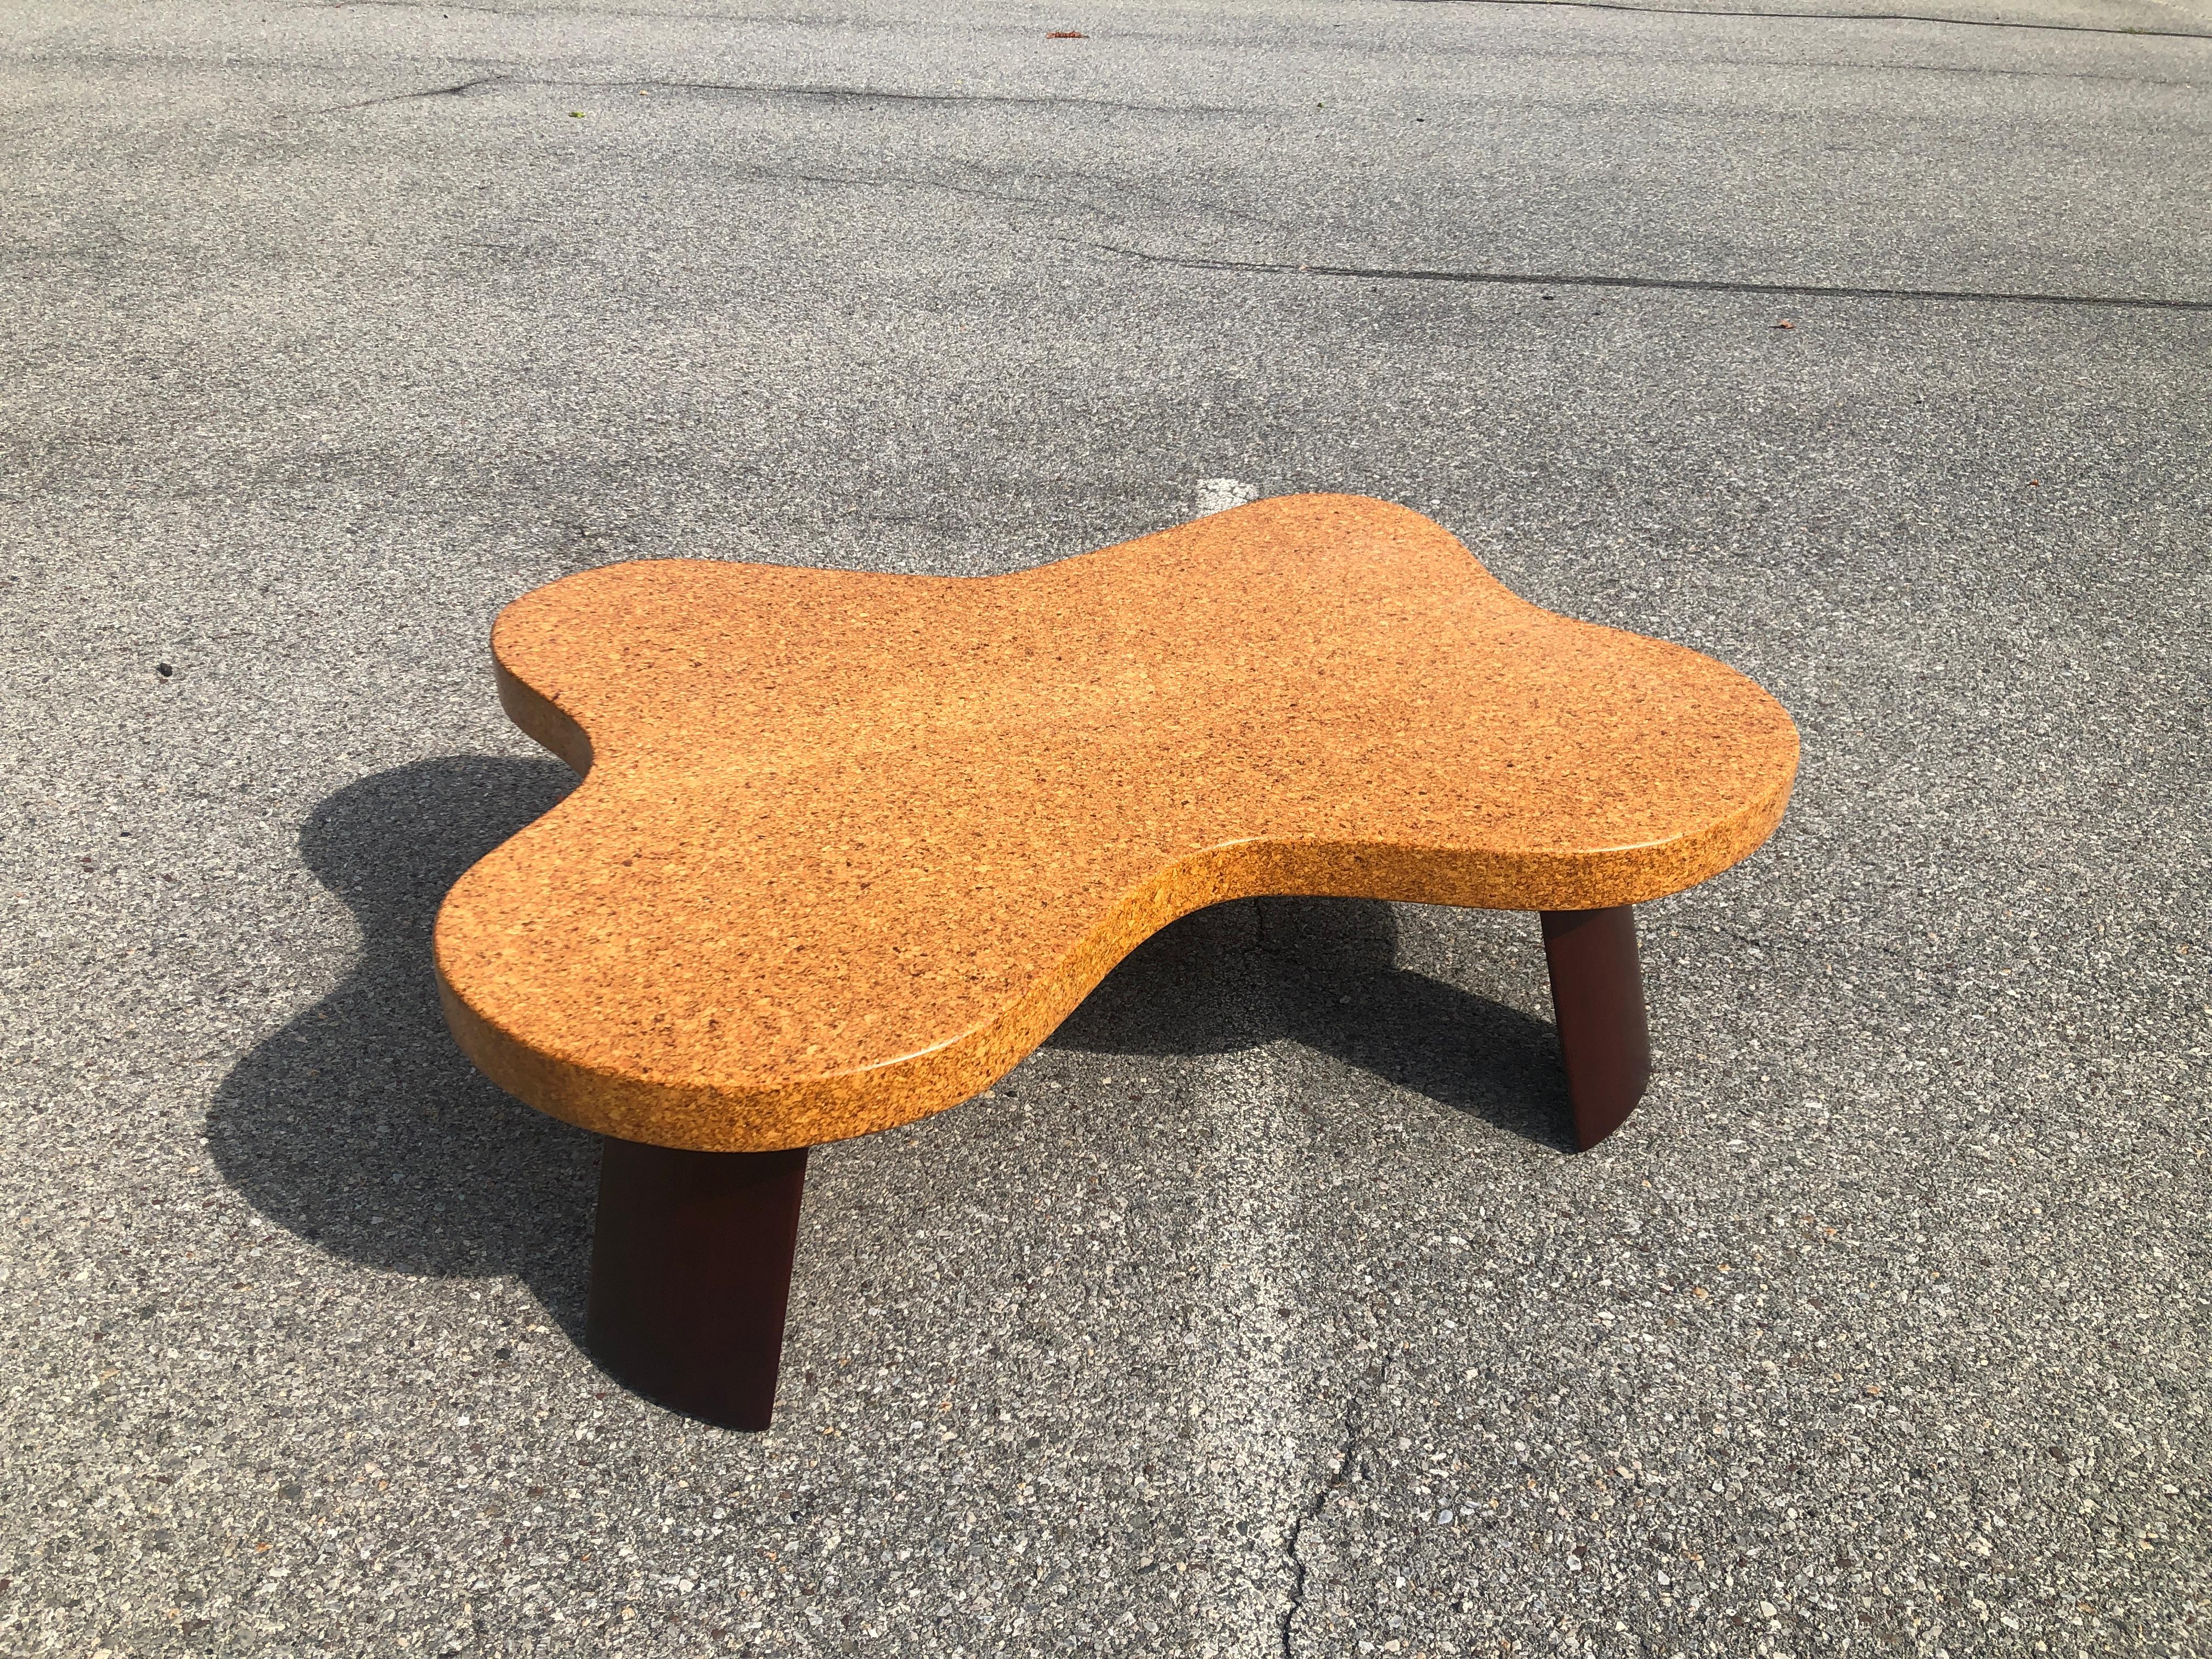 Morphic, signature Paul Frankl cloud coffee table model 5005 designed for Johnson Furniture Company, 1951. The table is in excellent condition with a natural waxed cork top and darkened mahogany legs. 100 percent restored surface near mint.
   